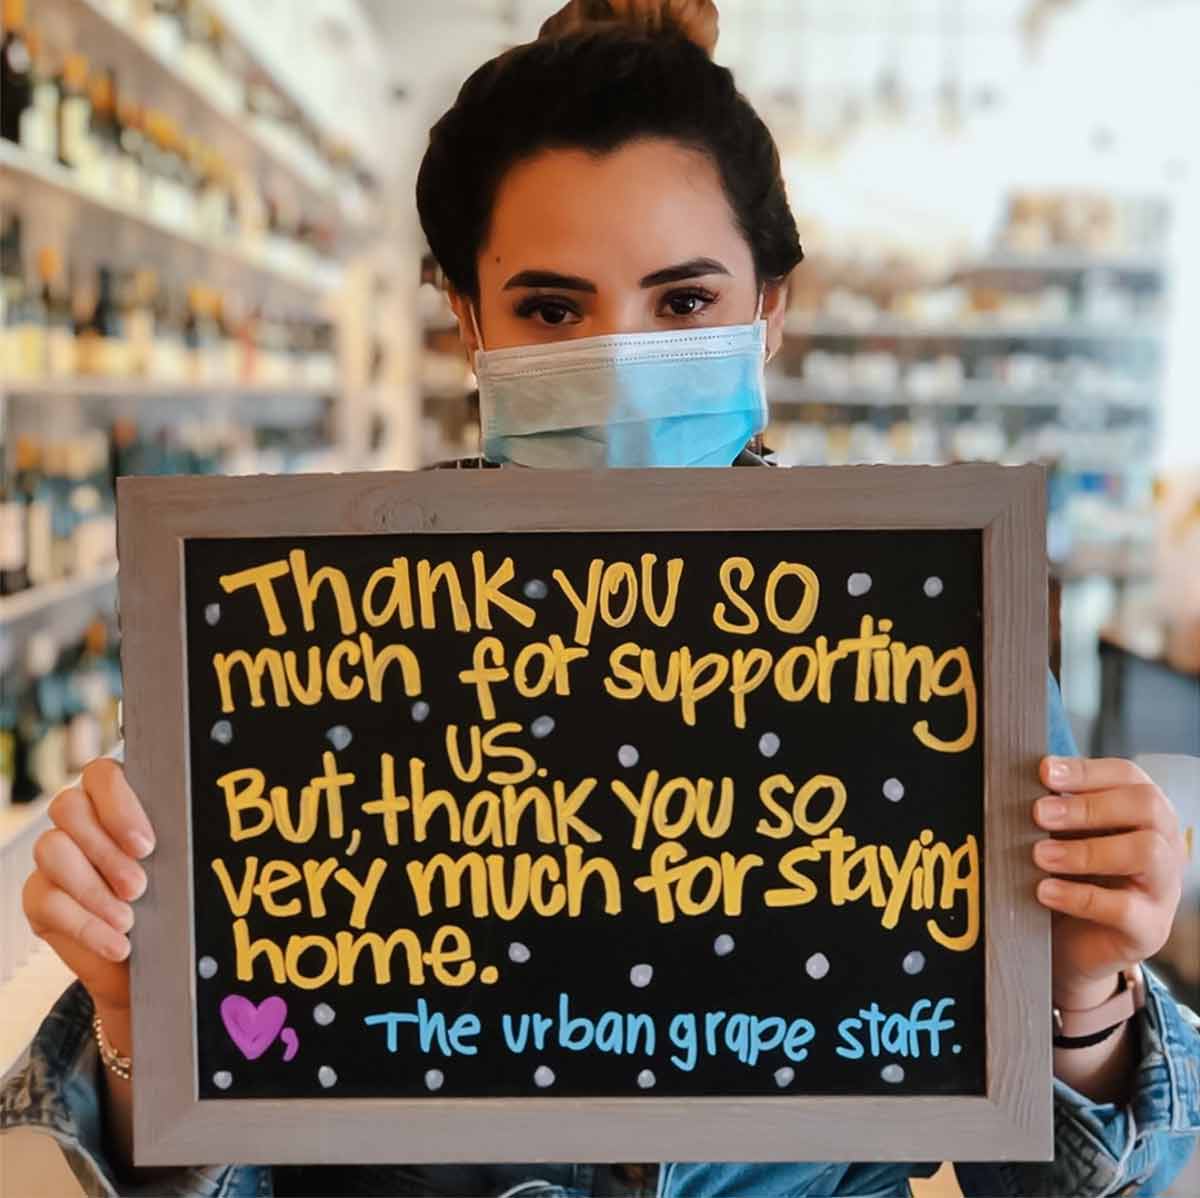 A woman holding a chalkboard sign thanking people for their support.